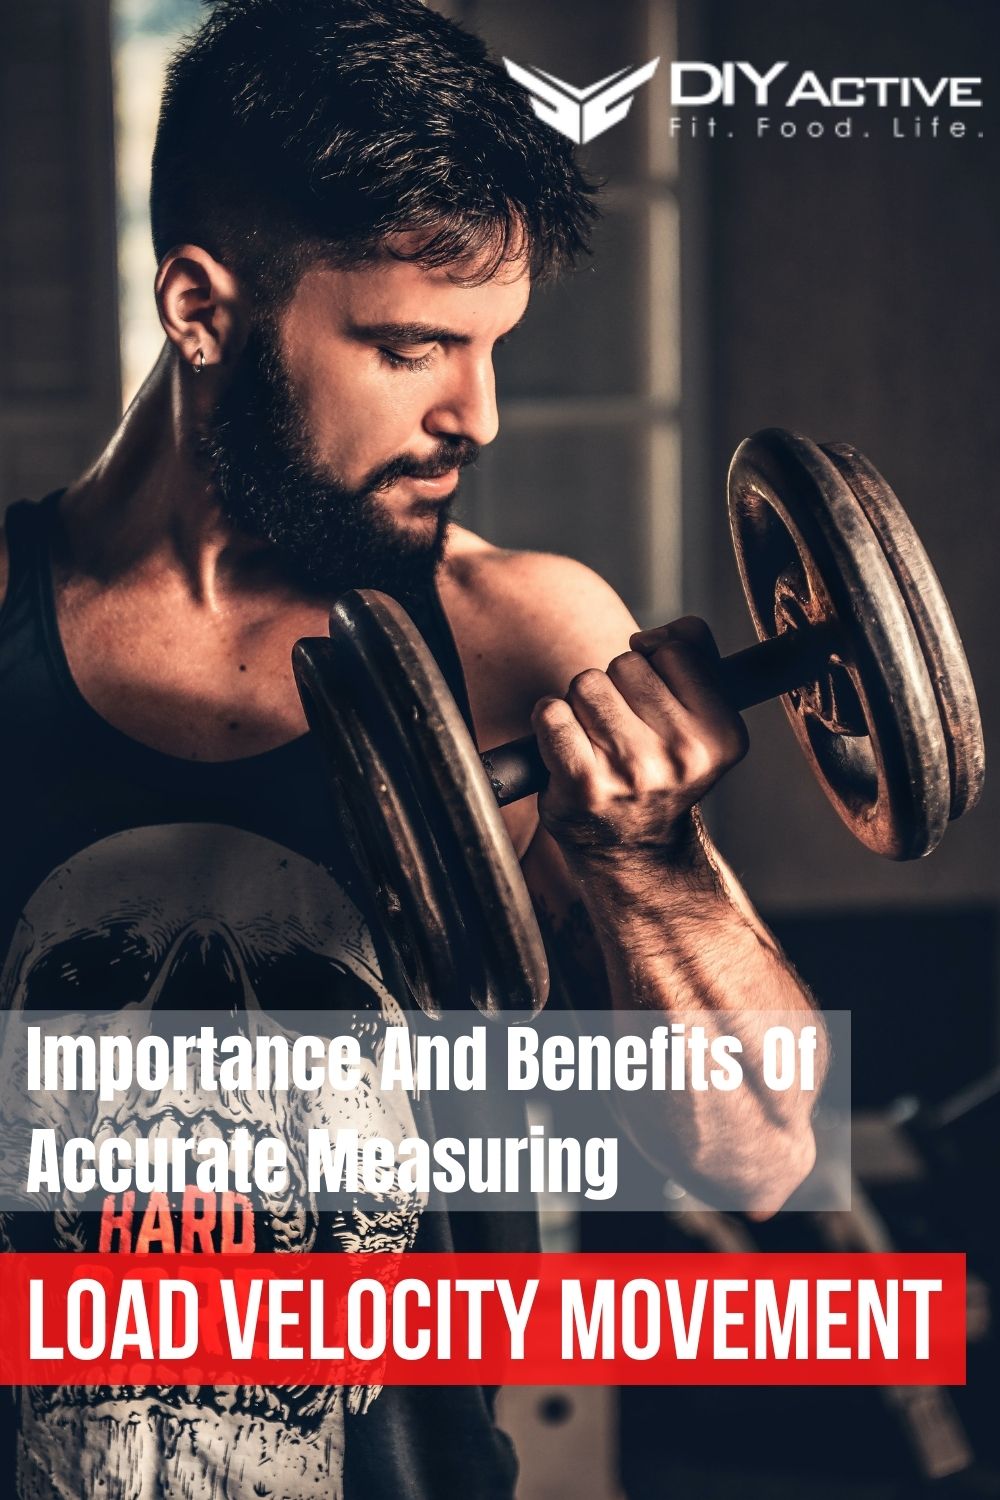 The Importance And Benefits Of Accurate Measuring The Load Velocity Movement